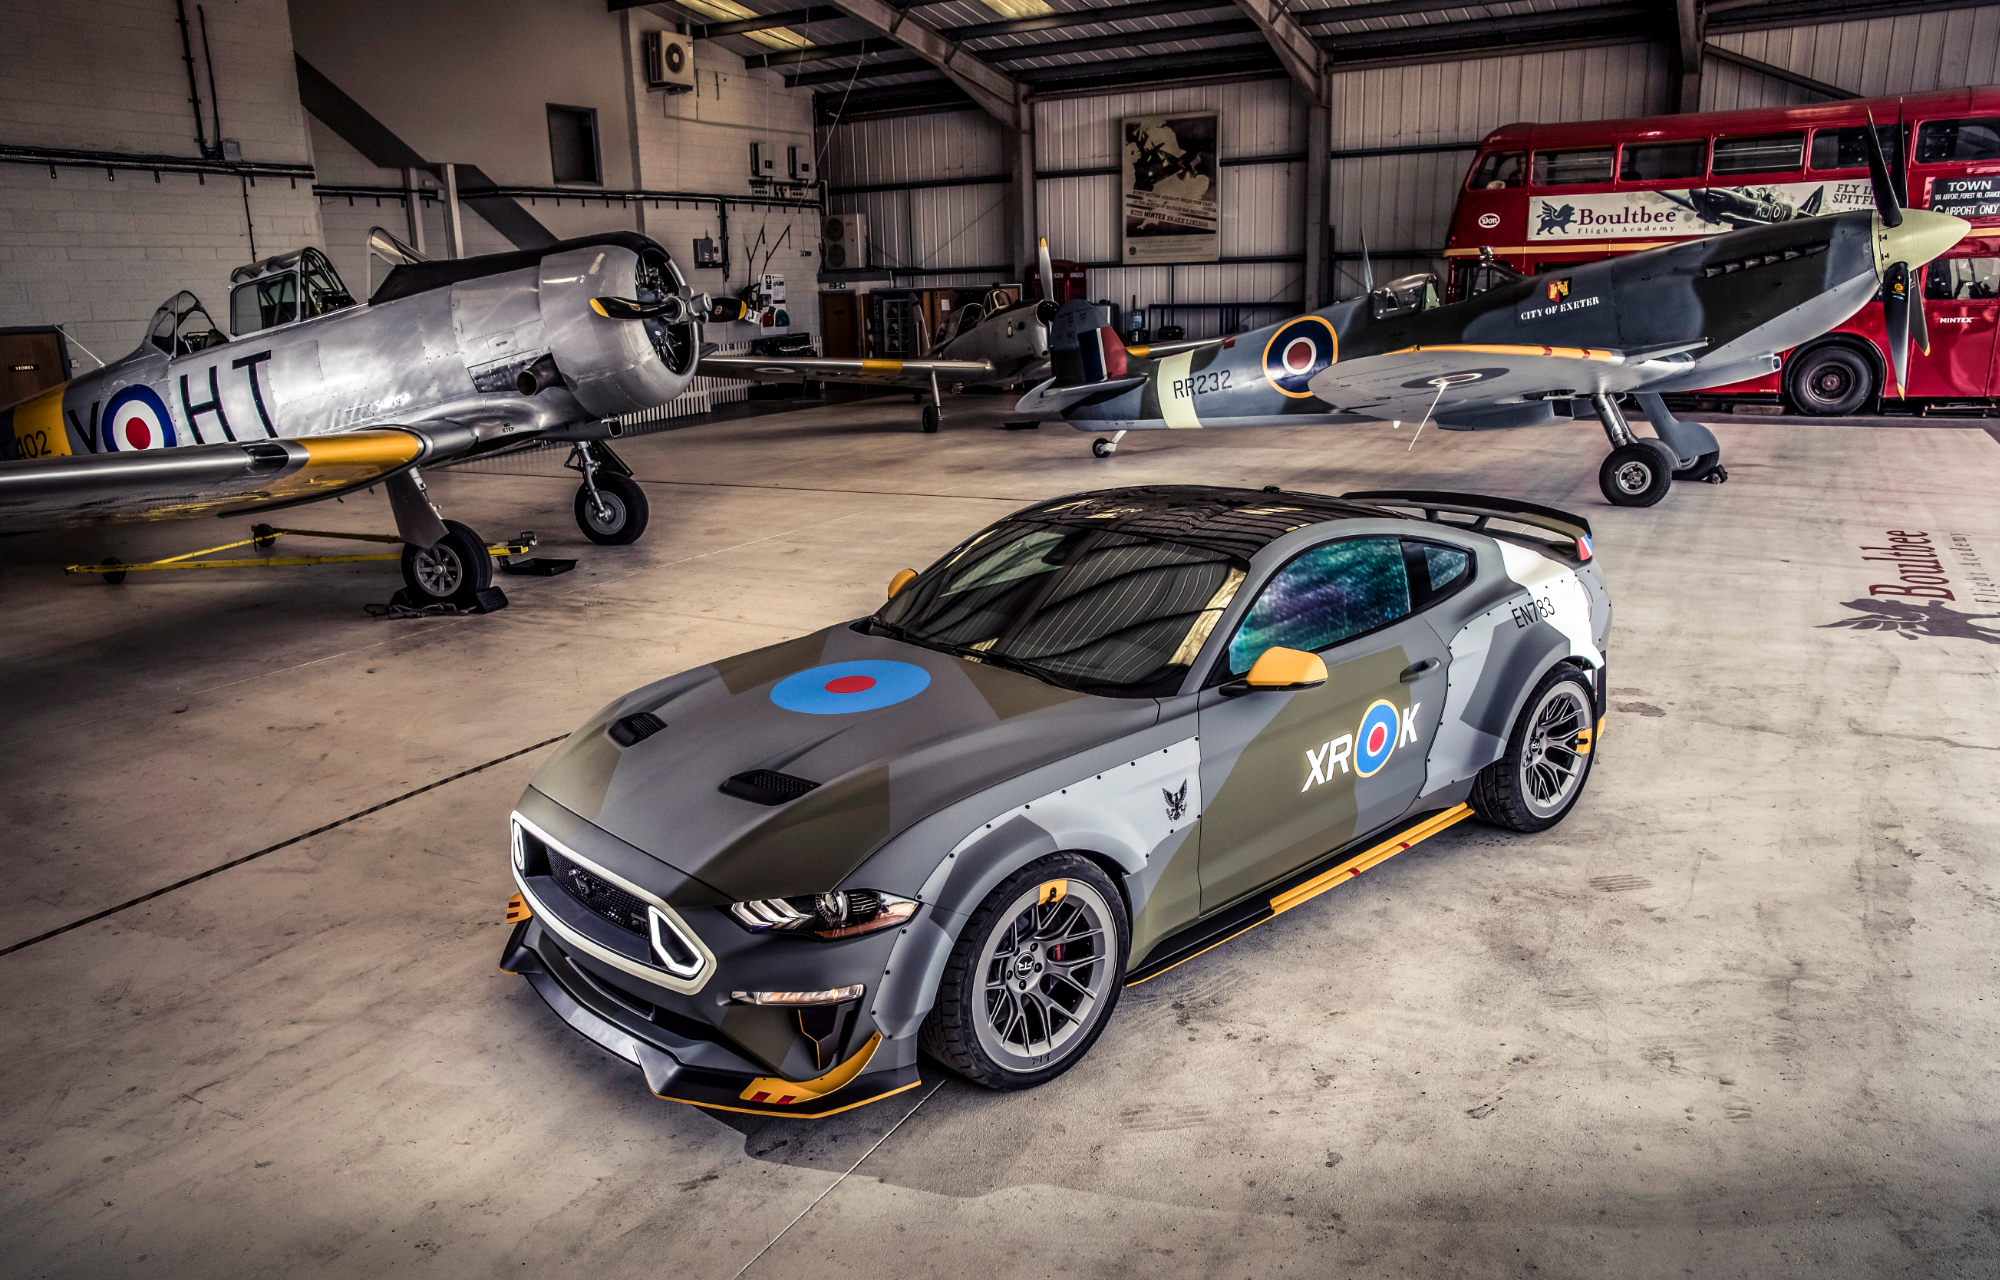 Eagle Squadron Mustang GT at Goodwood Festival of Speed 2018